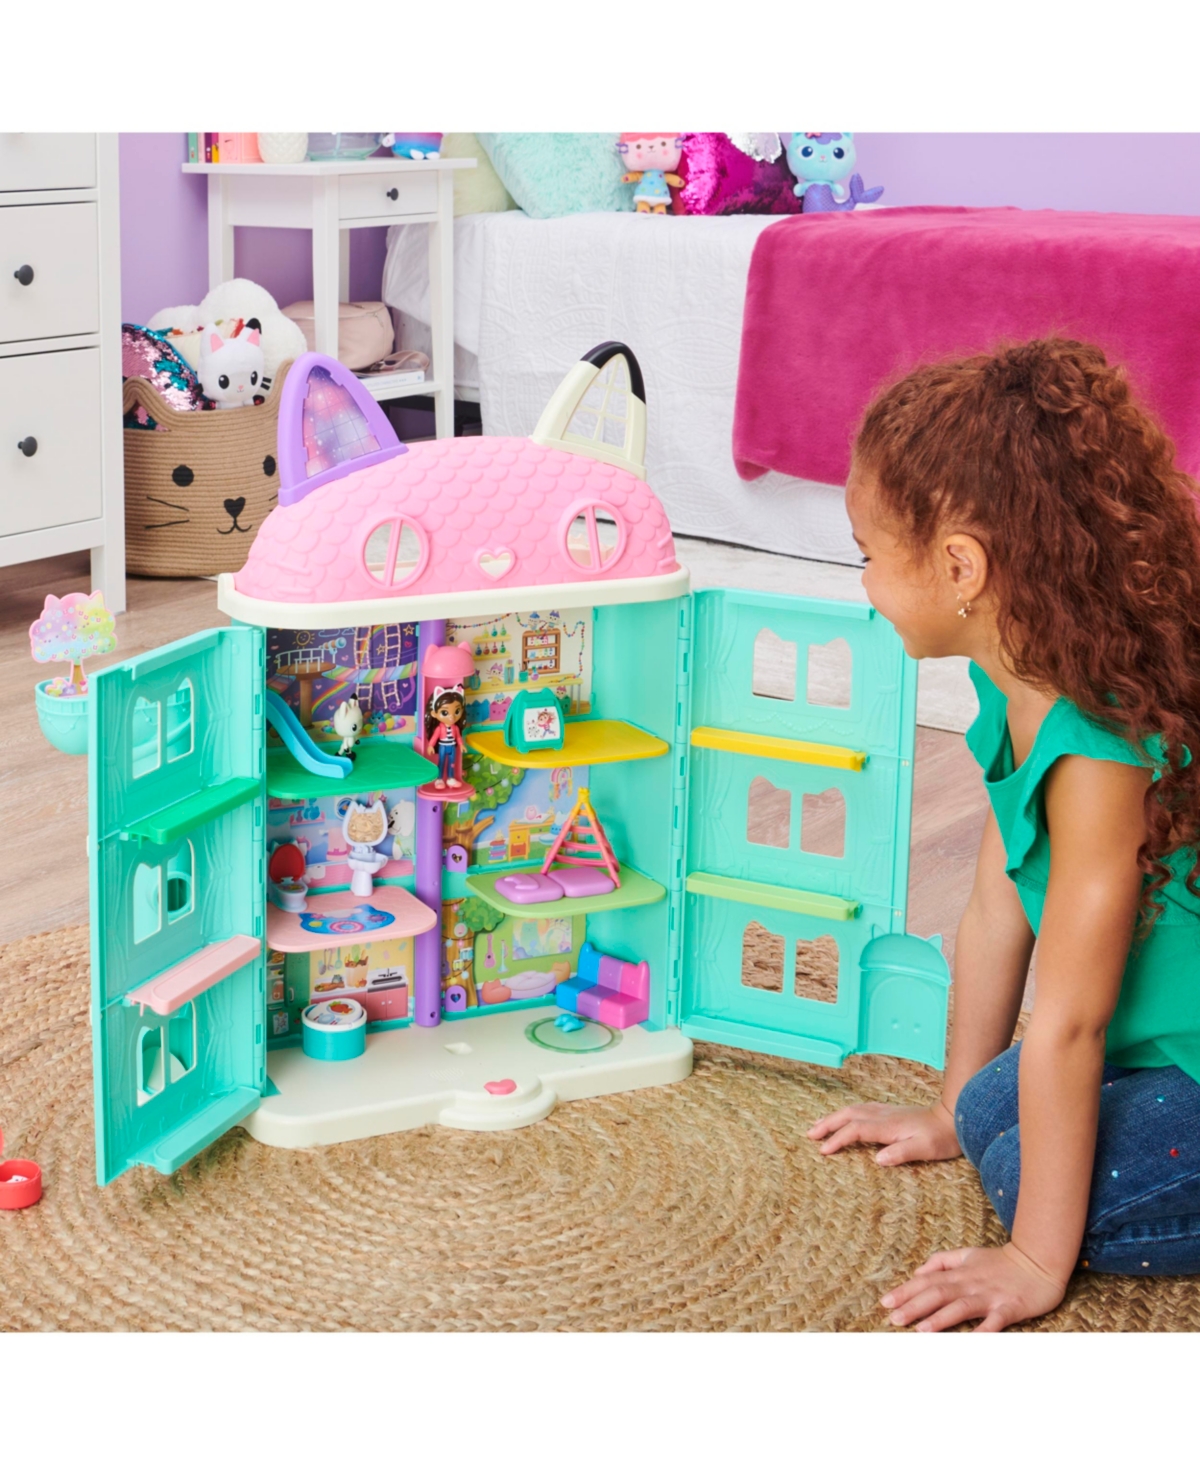 Shop Gabby's Dollhouse Purrfect Dollhouse Playset With Accessories In Multi-color